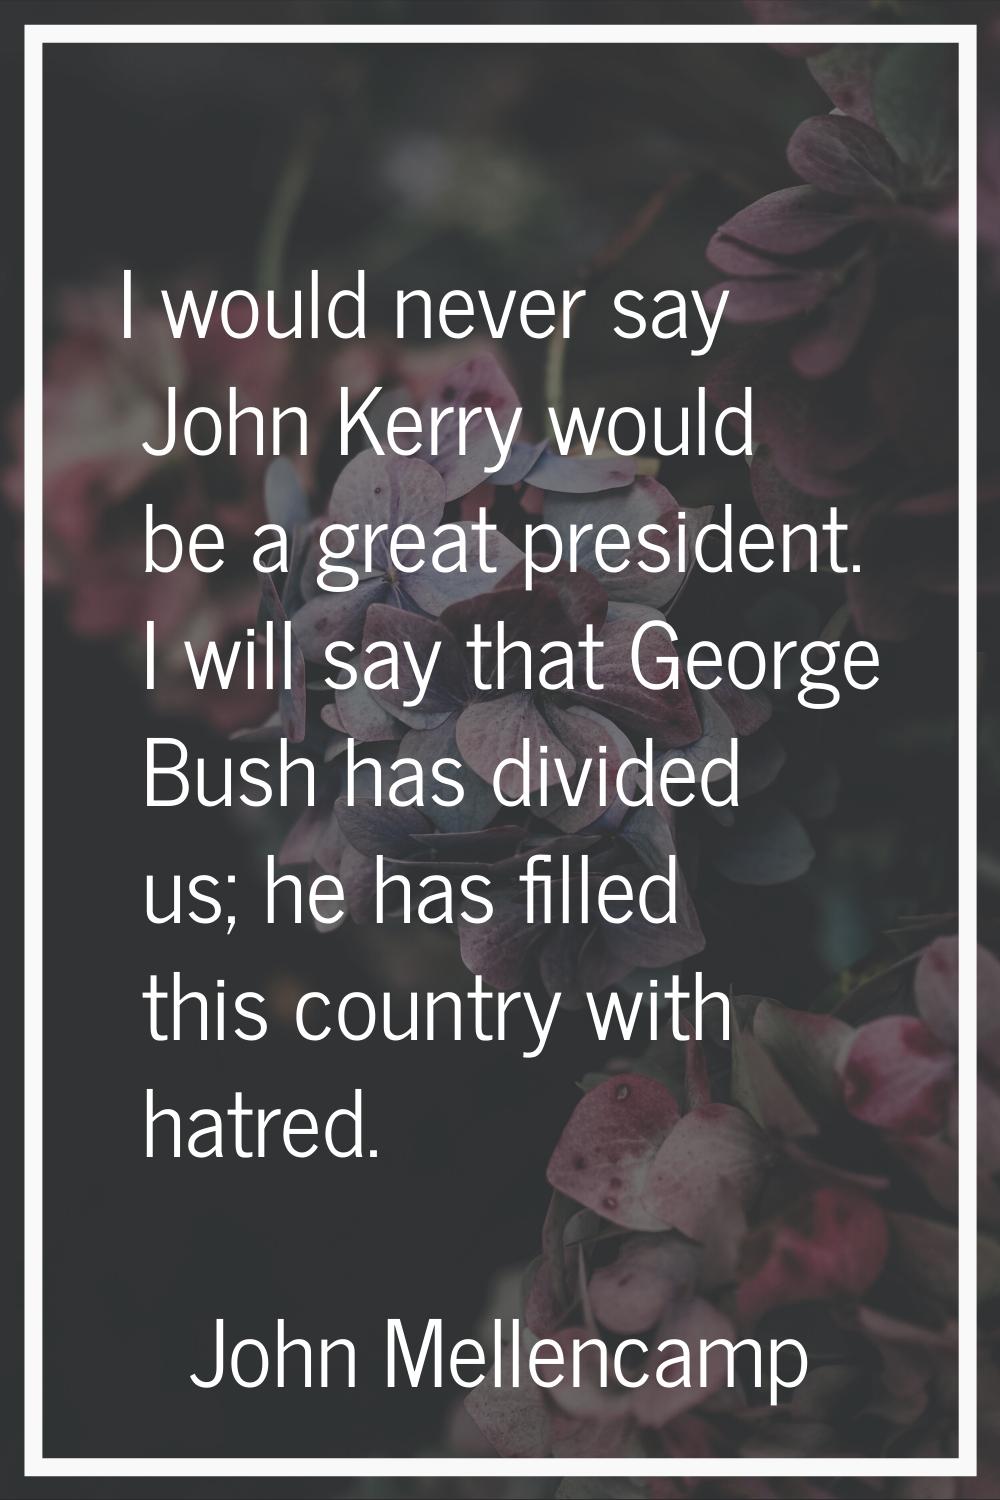 I would never say John Kerry would be a great president. I will say that George Bush has divided us